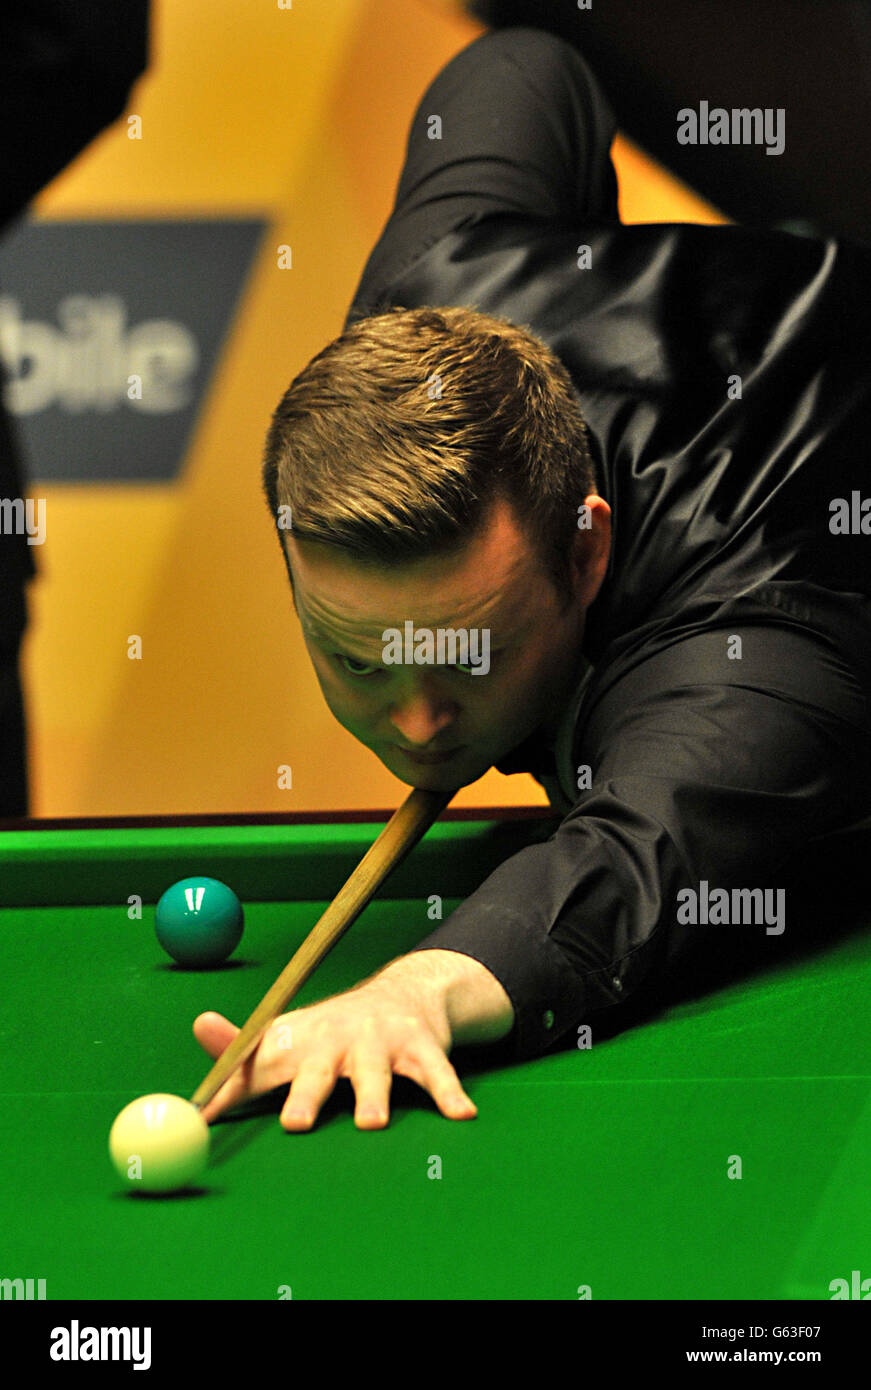 Shaun Murphy in action during his quarter final match against Judd Trump during the Betfair World Championships at the Crucible, Sheffield. Stock Photo